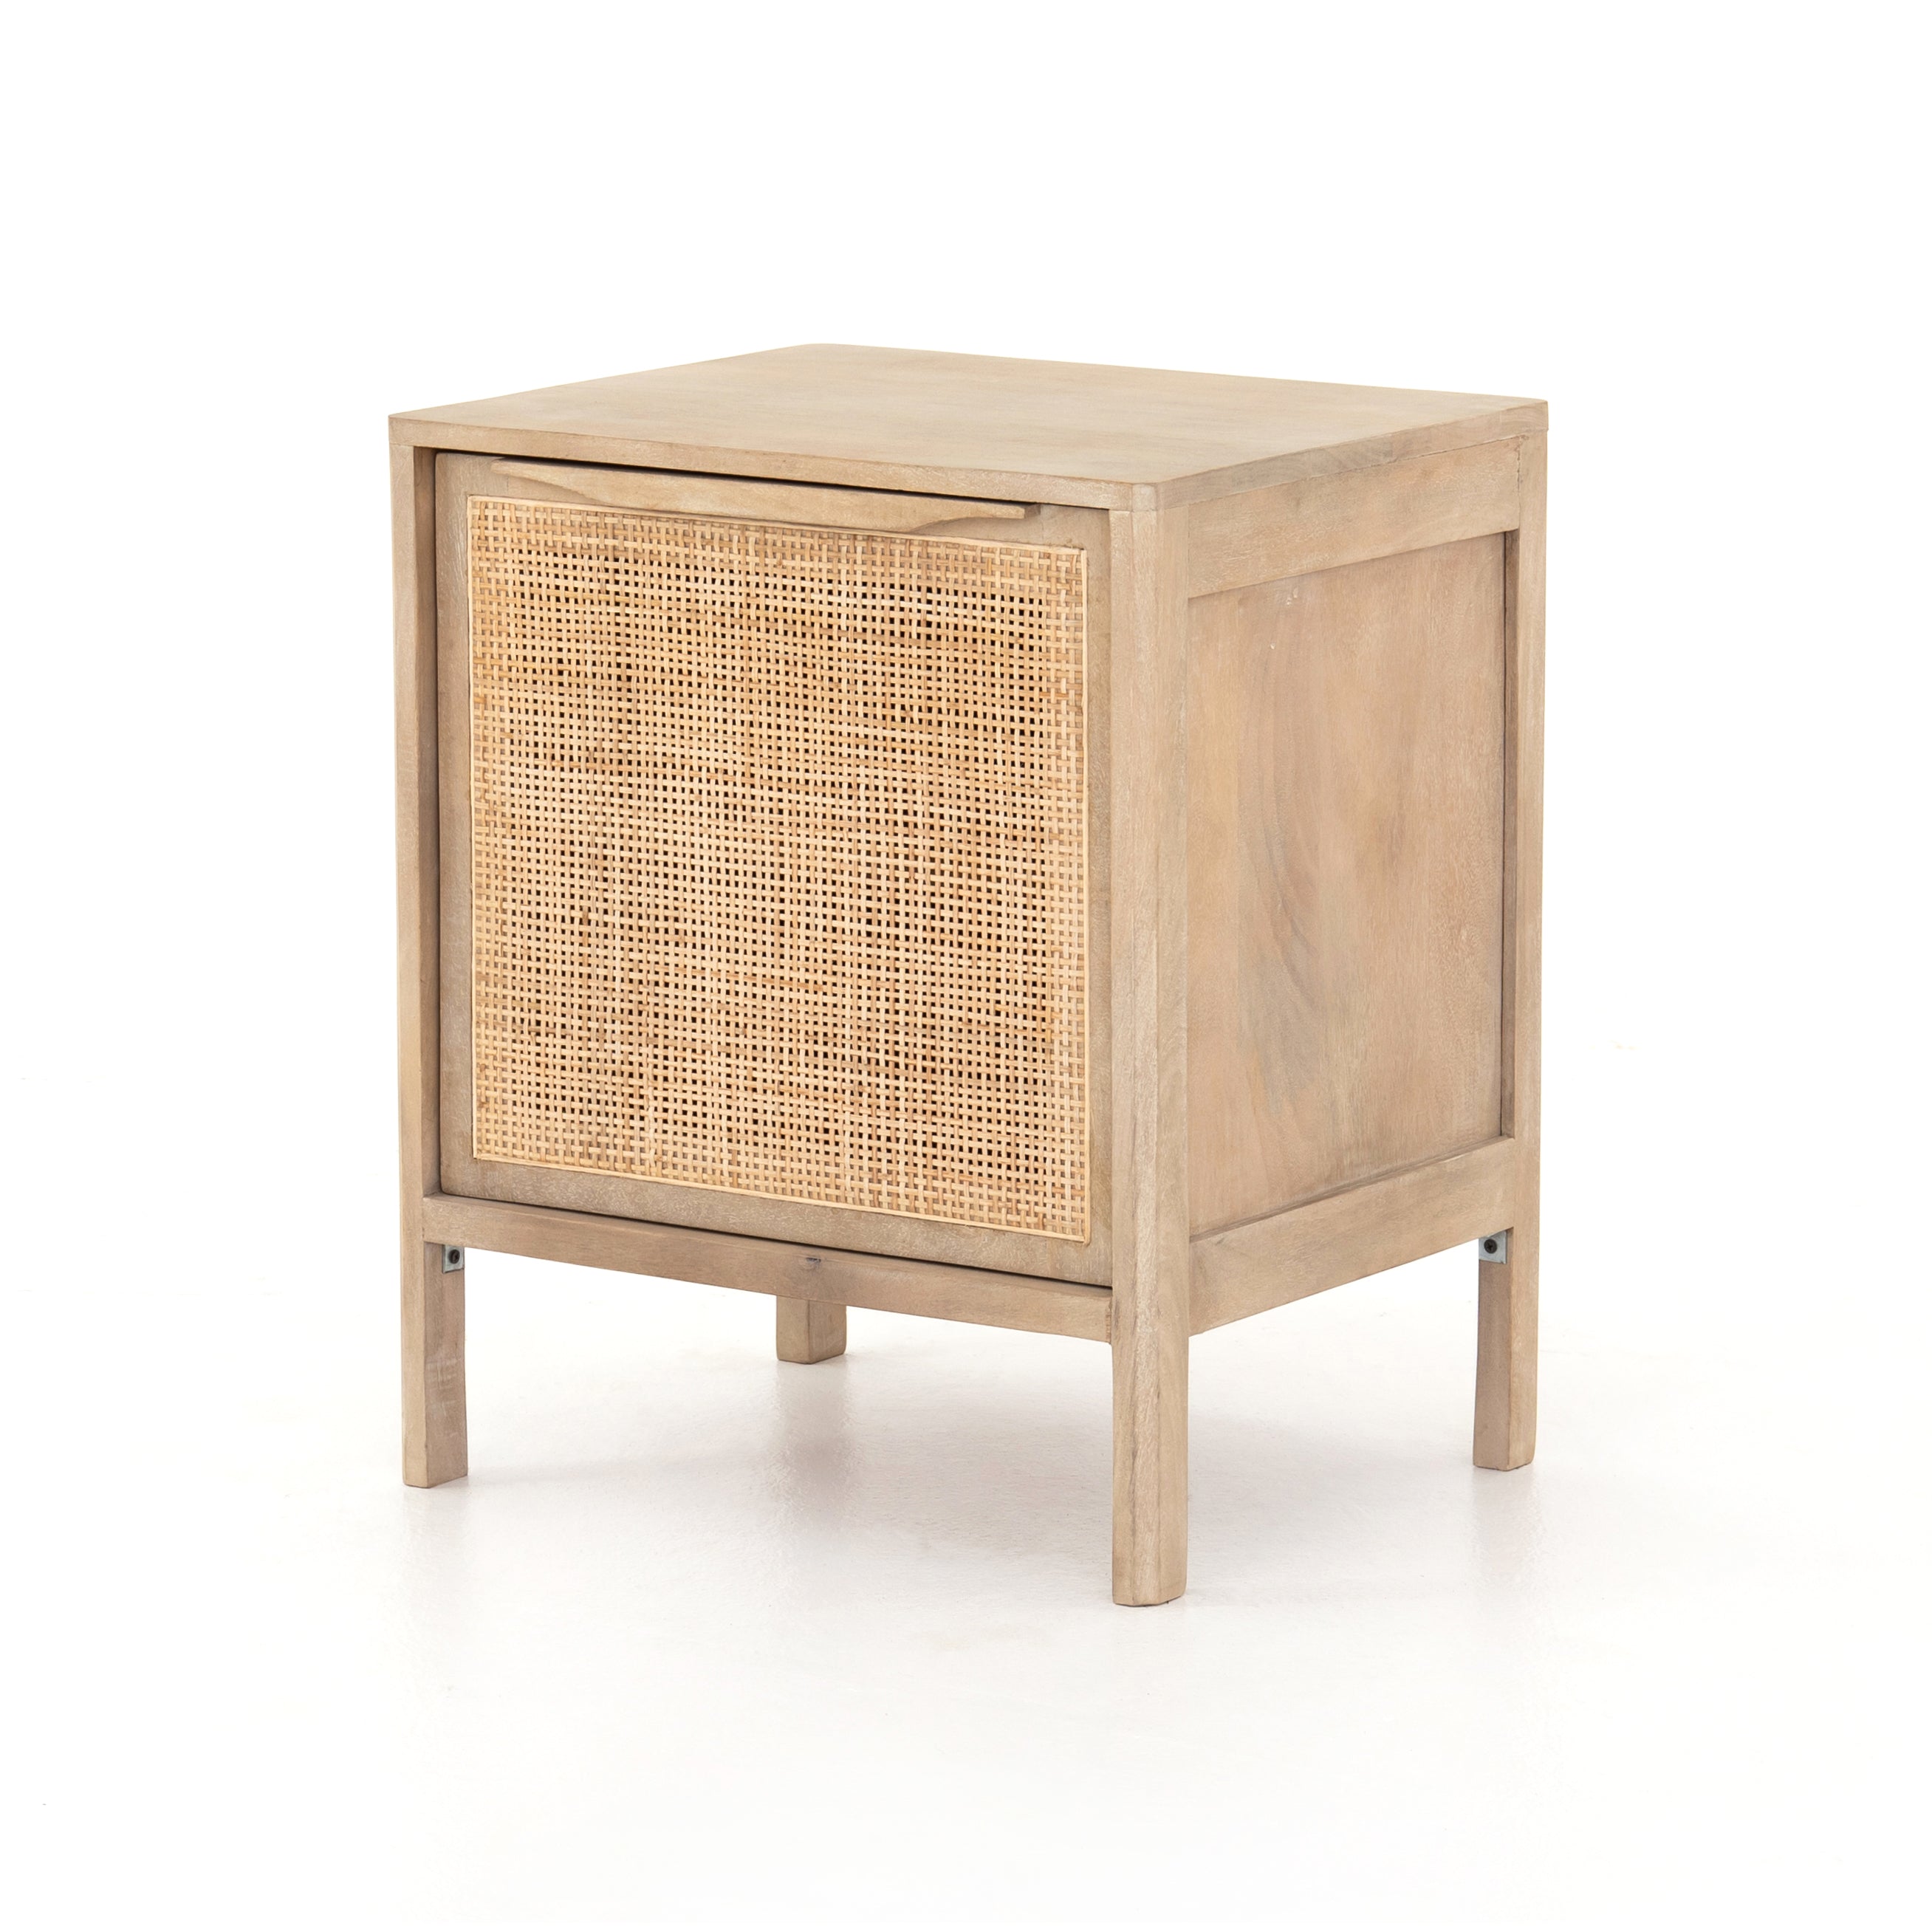 Natural mango frames inset woven cane, for a light, textural look with fresh organic allure. Removable interior shelf for clever convenience. Amethyst Home provides interior design, new construction, custom furniture, and area rugs in the Portland metro area.